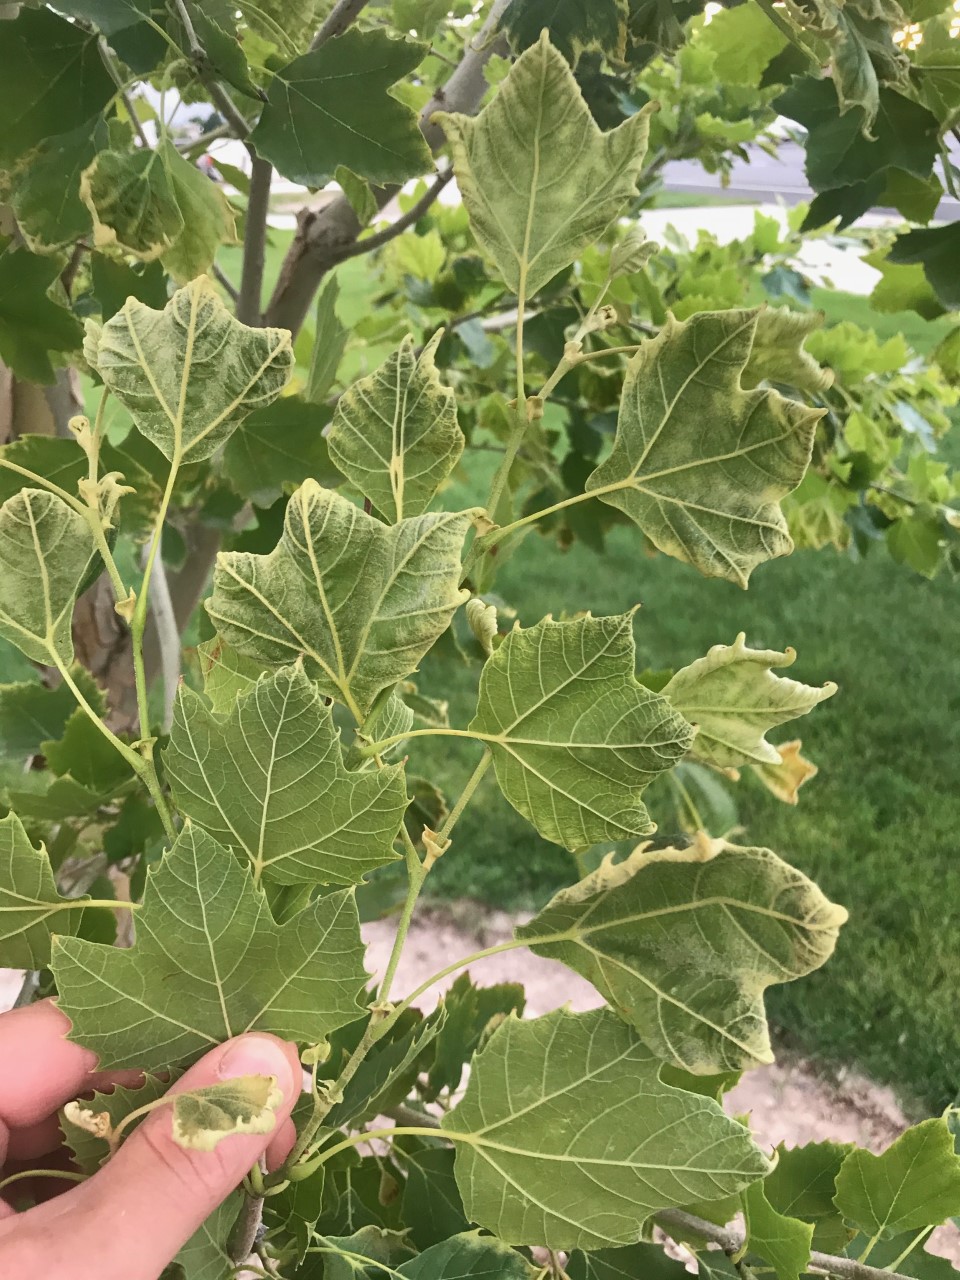 London Planetree leaves with yellow curling edges